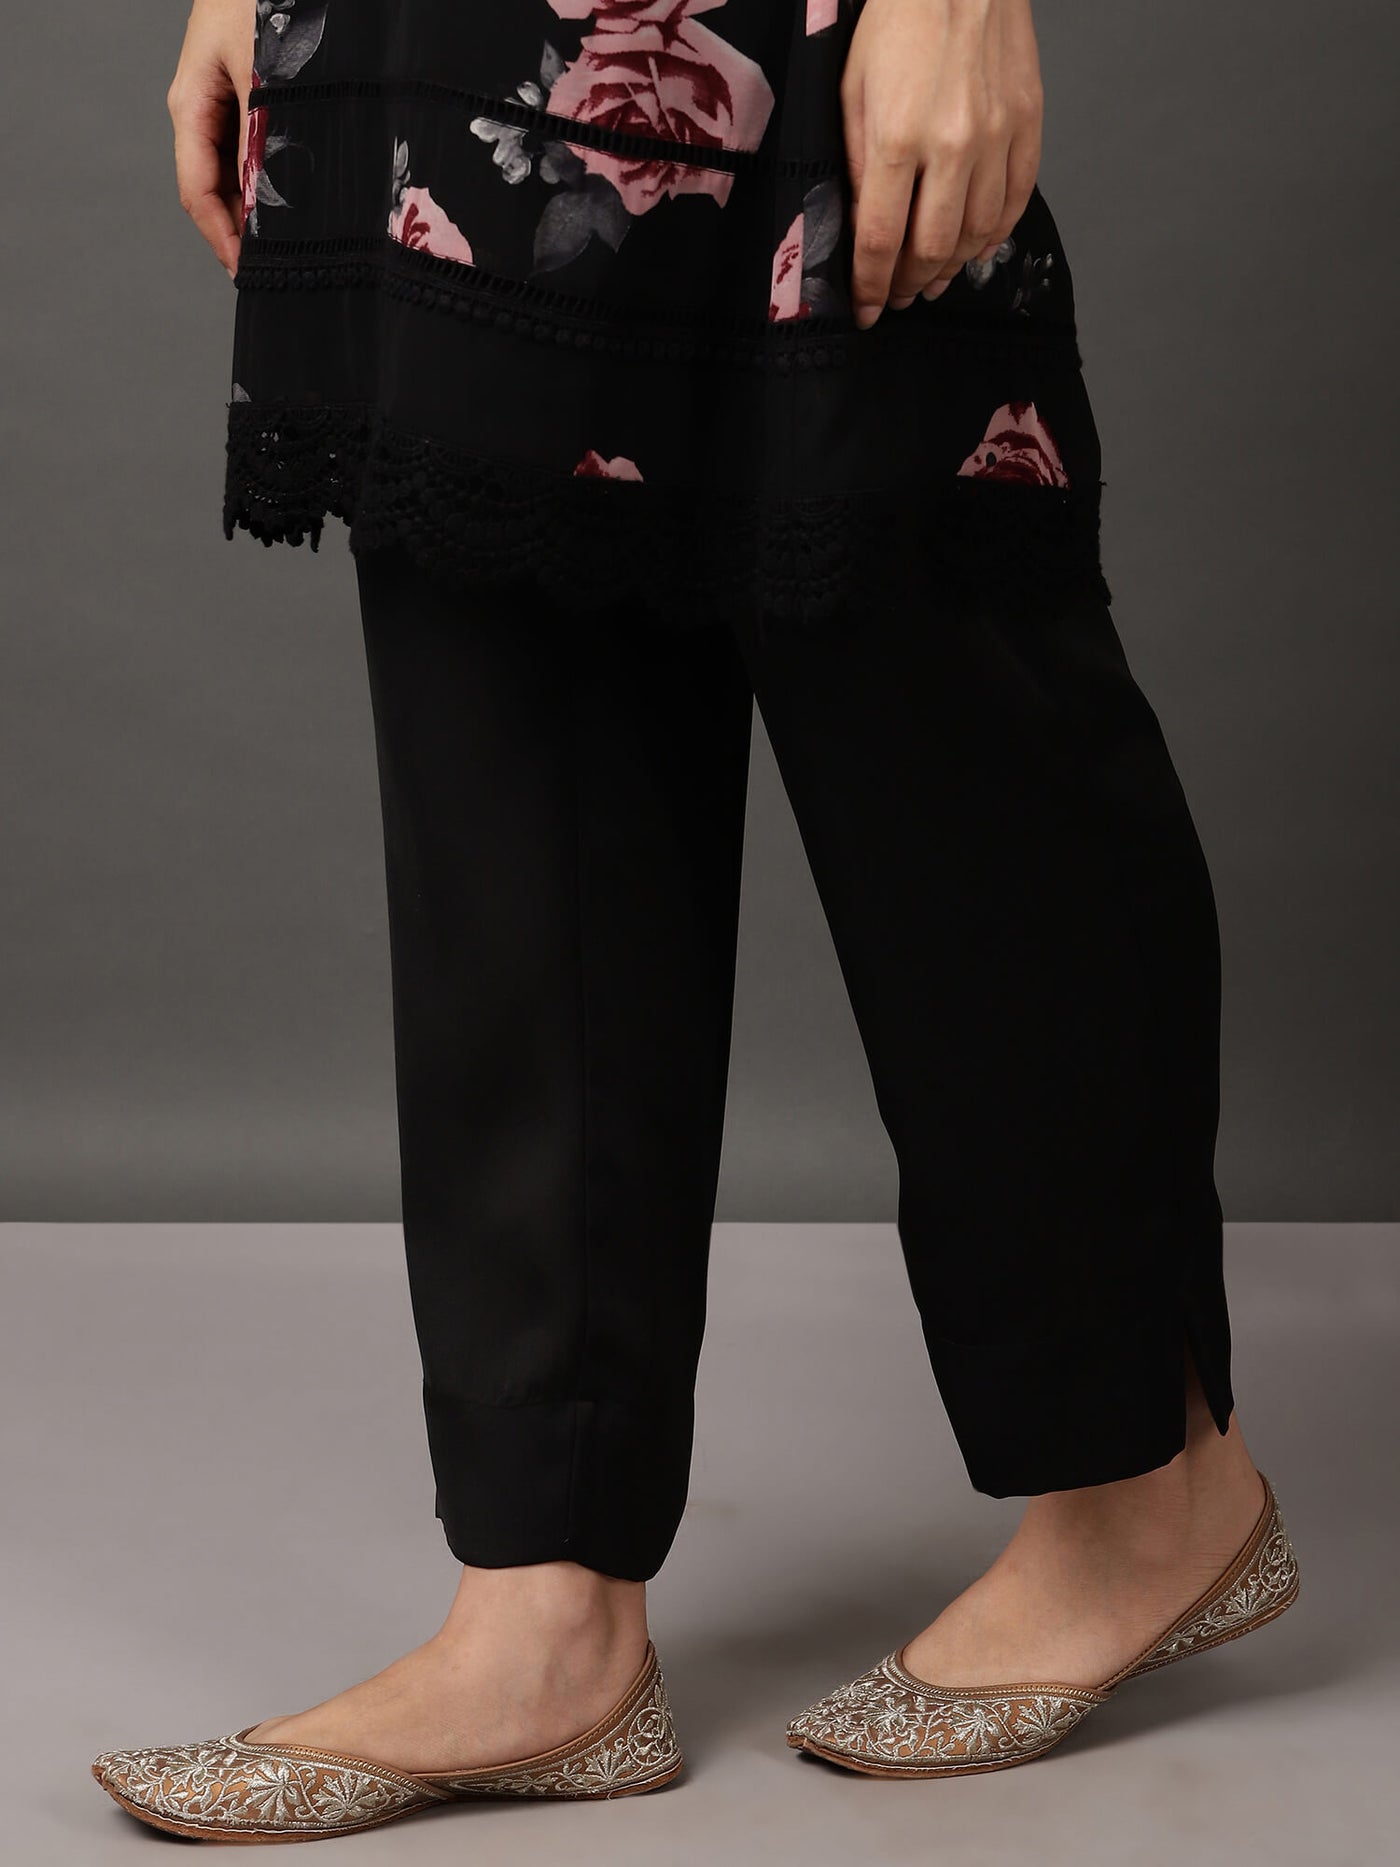 Black Short Floral Georgette Kurta And Pant With Dupatta & Camisole